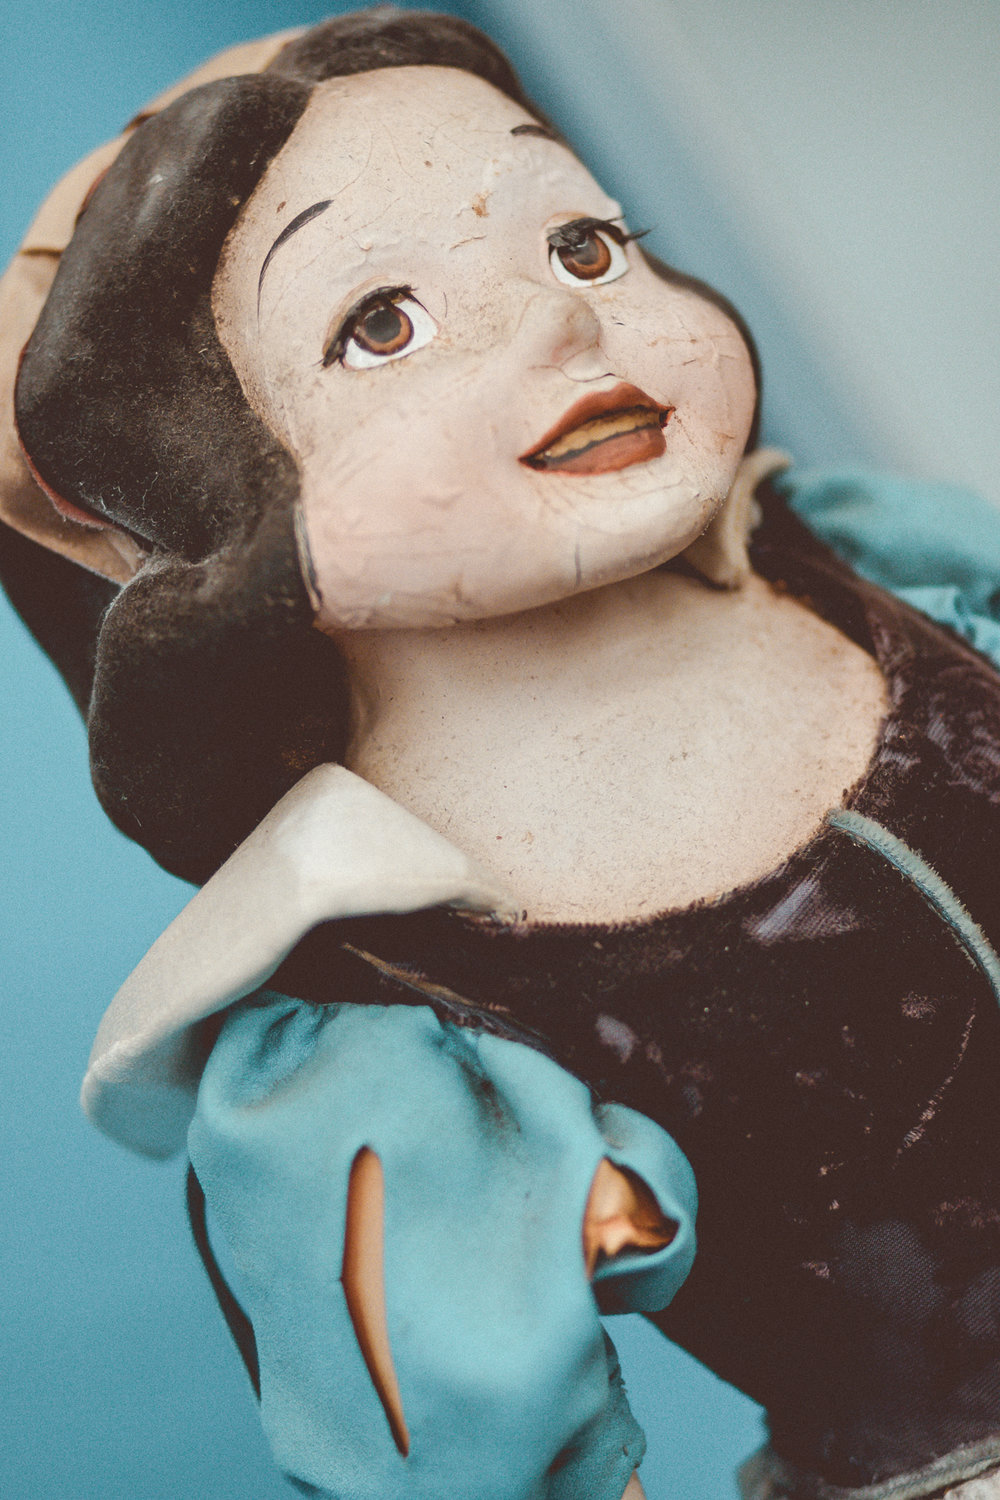  The  iconic  melted Snow White. Don’t let her appearance fool you, Snow White is still the fairest of them all for sale at an estimated $500-$700! 